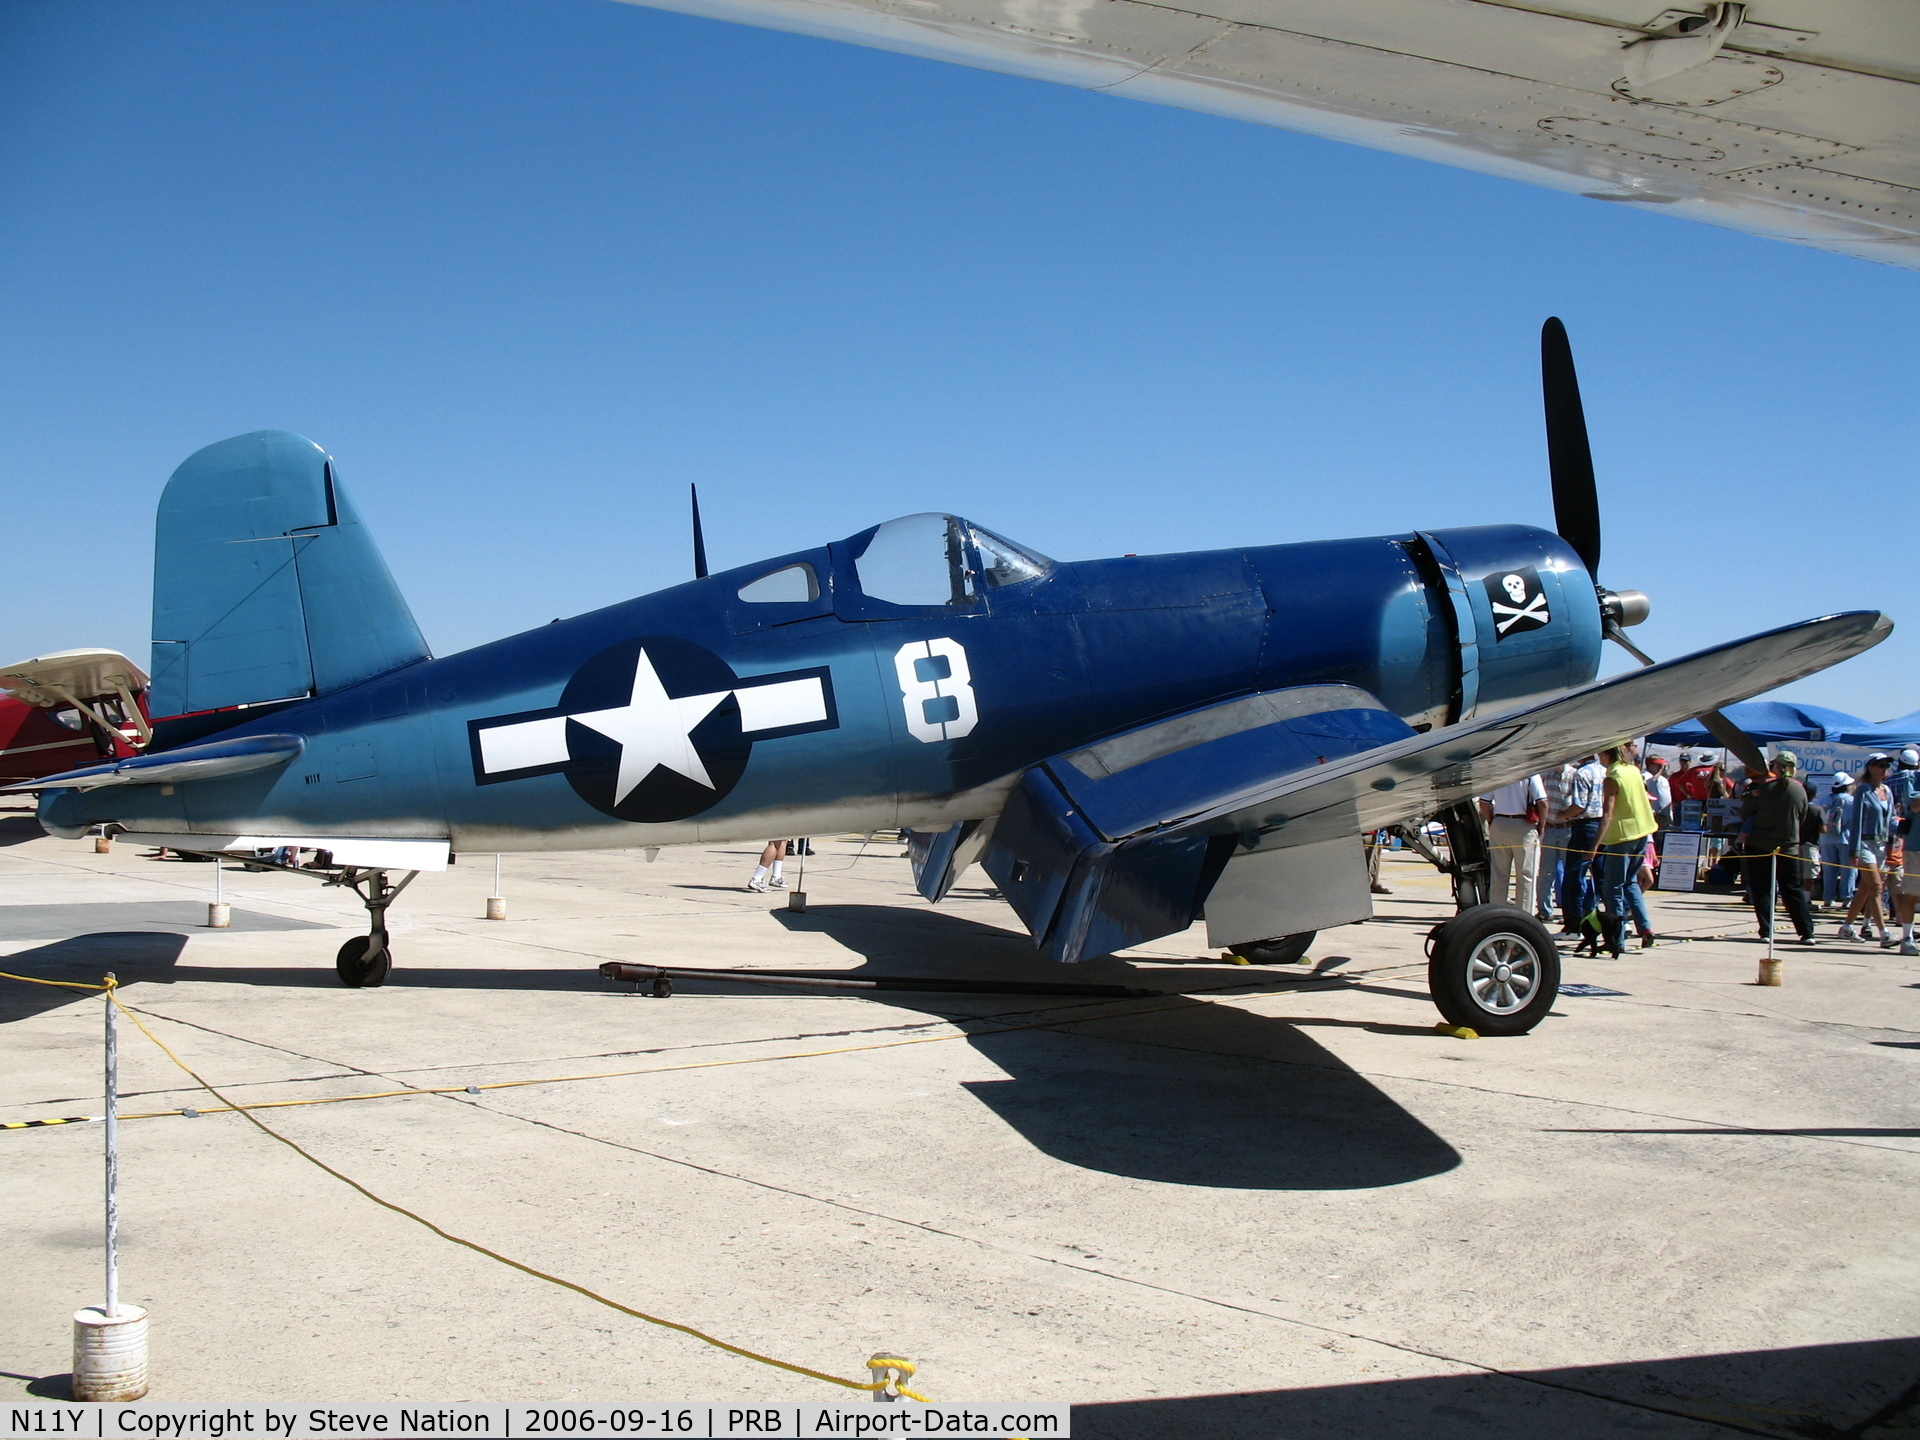 N11Y, Goodyear FG-1D Corsair C/N Not found (67087/N11Y), CC Air Corp. Goodyear FG-1D BuAer 67097 #8 with skull & cross bones on display during airshow @ Paso Robles Municipal Airport, CA